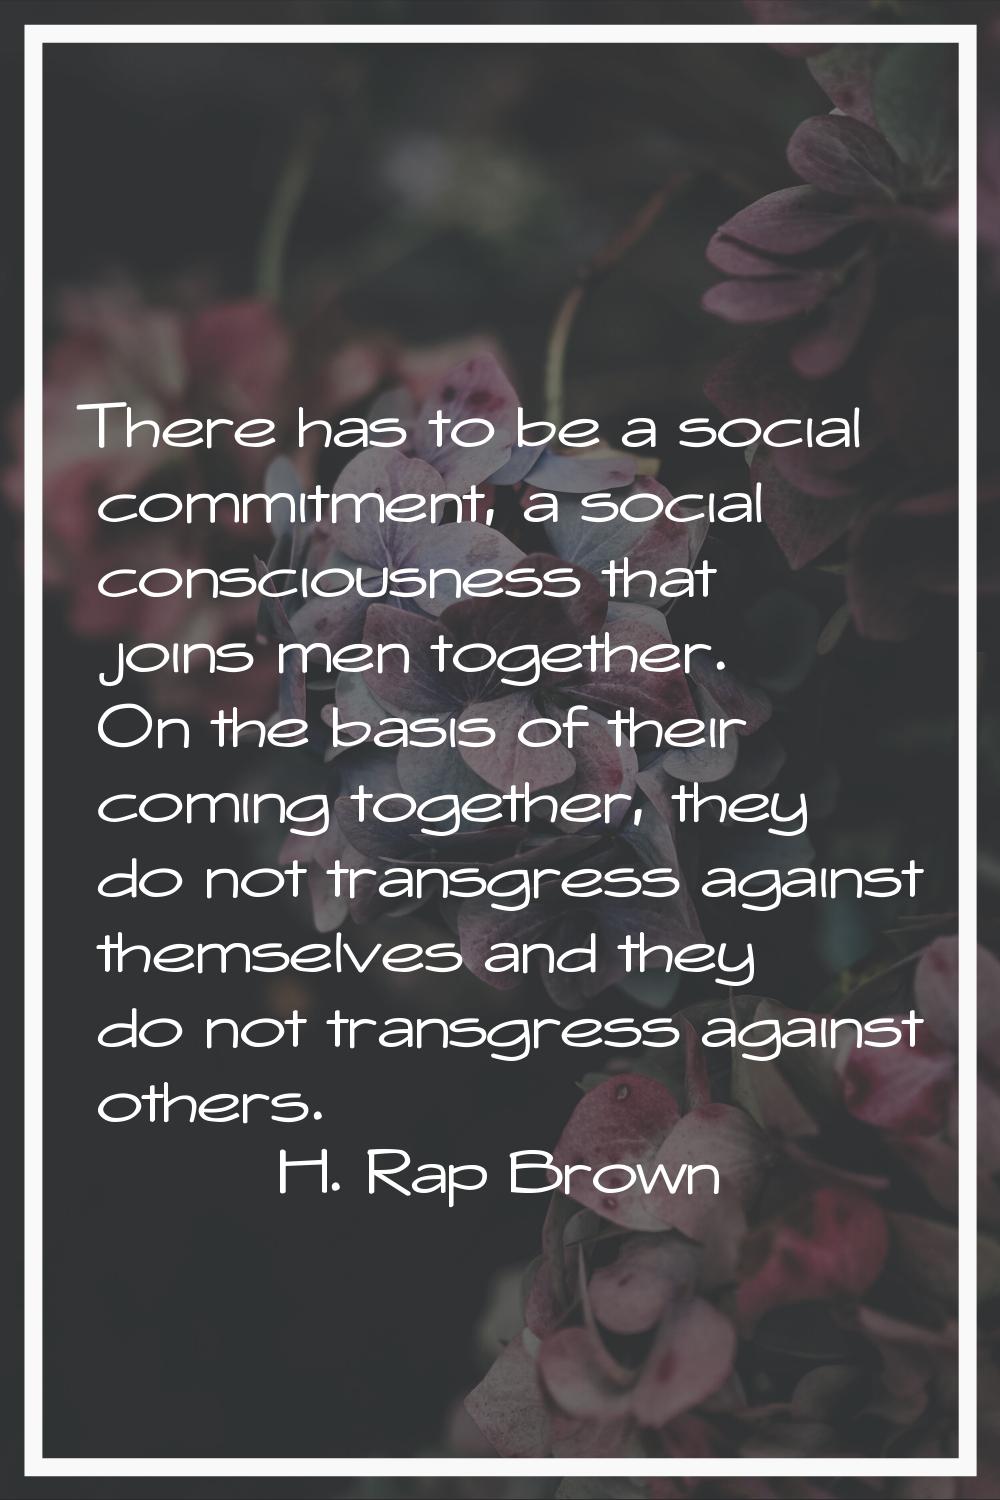 There has to be a social commitment, a social consciousness that joins men together. On the basis o